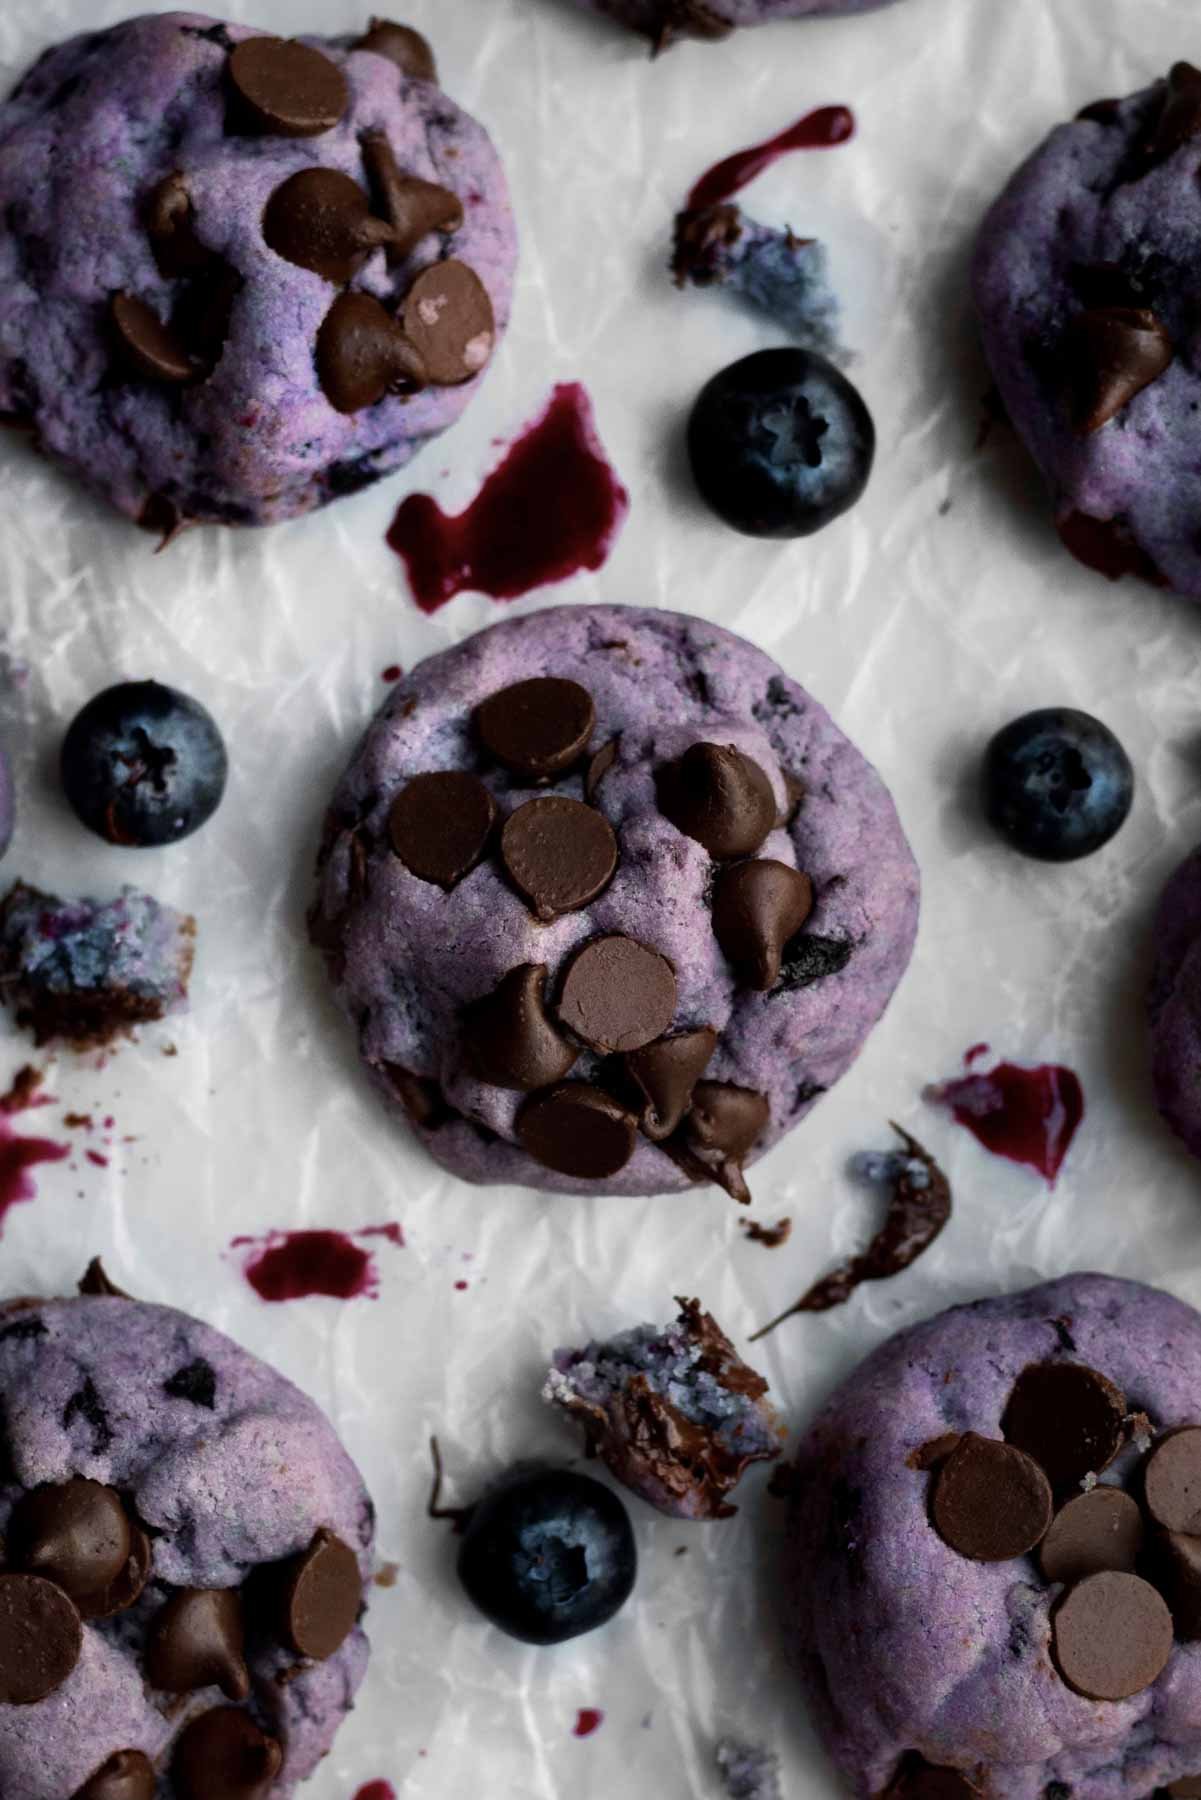 Lavender Vegan Blueberry Cookies with brown chocolate chips on parchment paper.